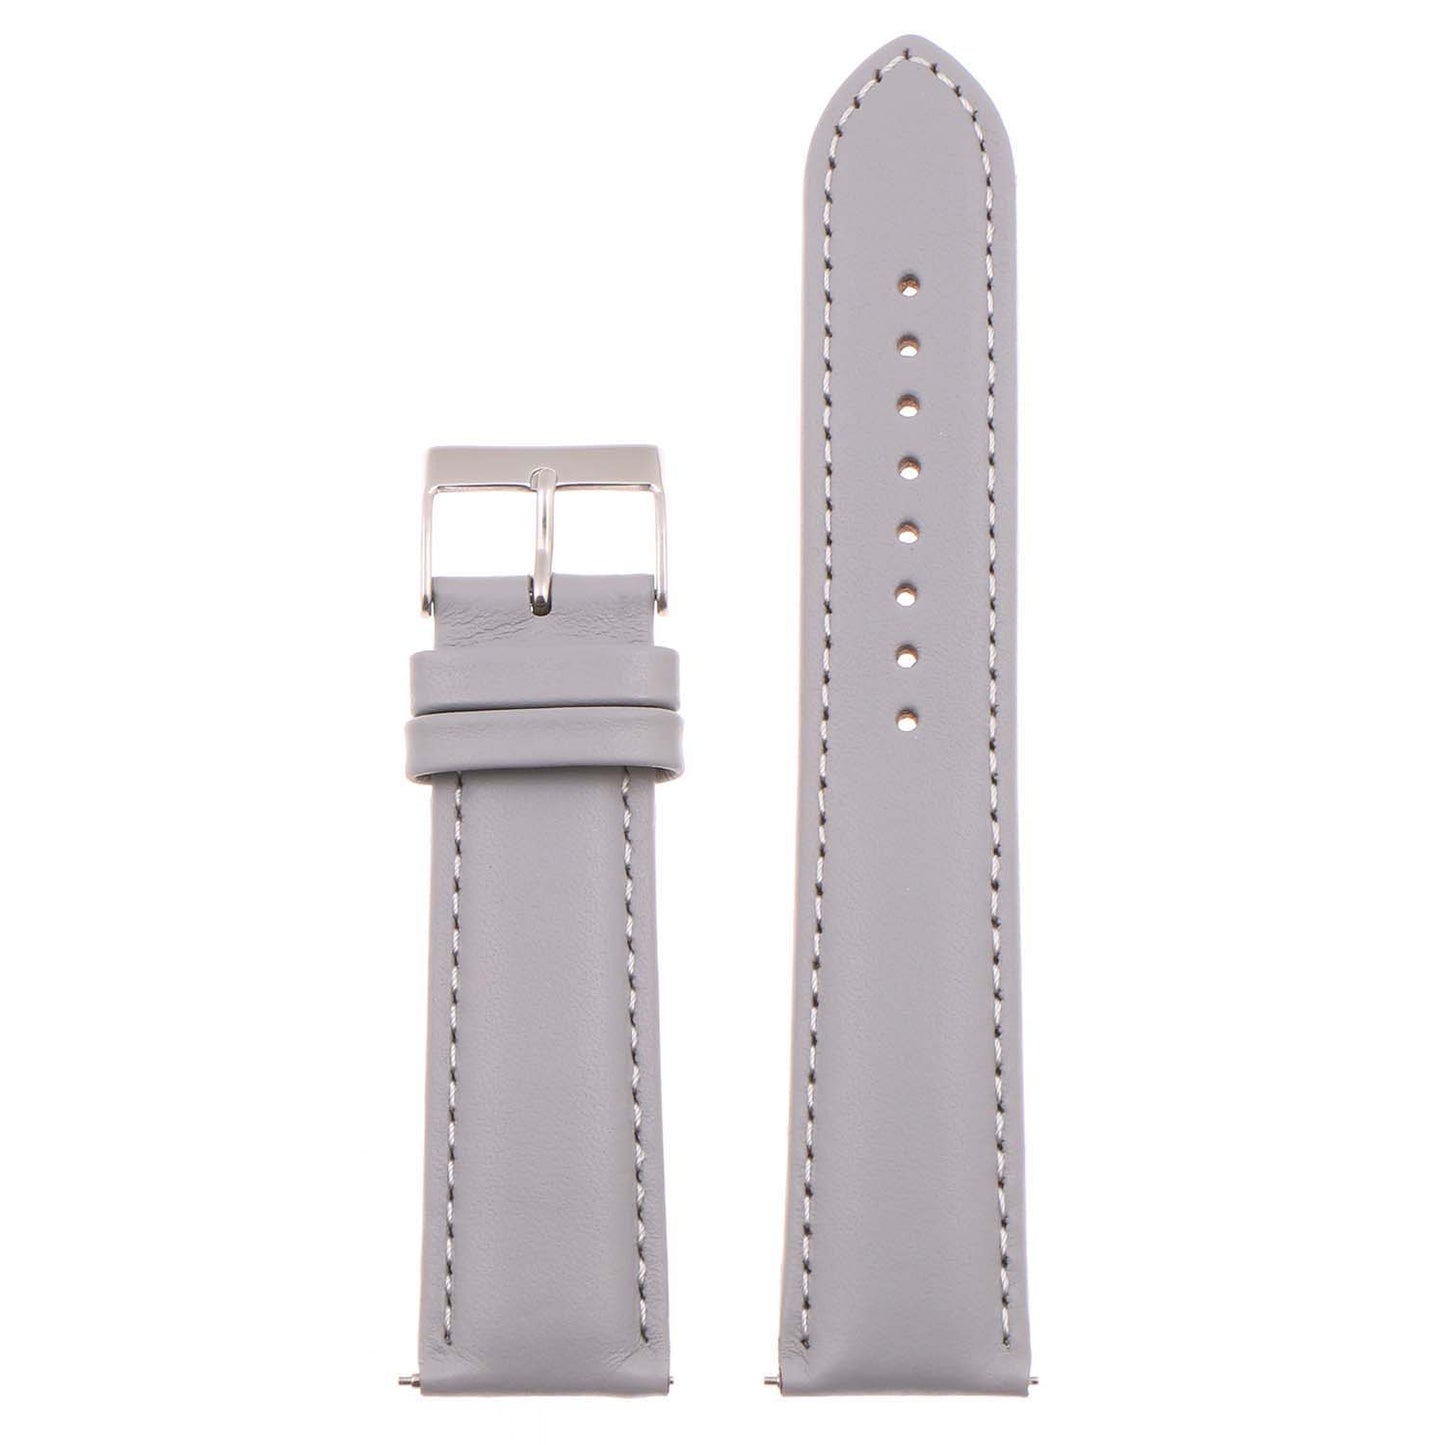 Classic Men's Strap (Short, Standard, Long) for OnePlus Watch